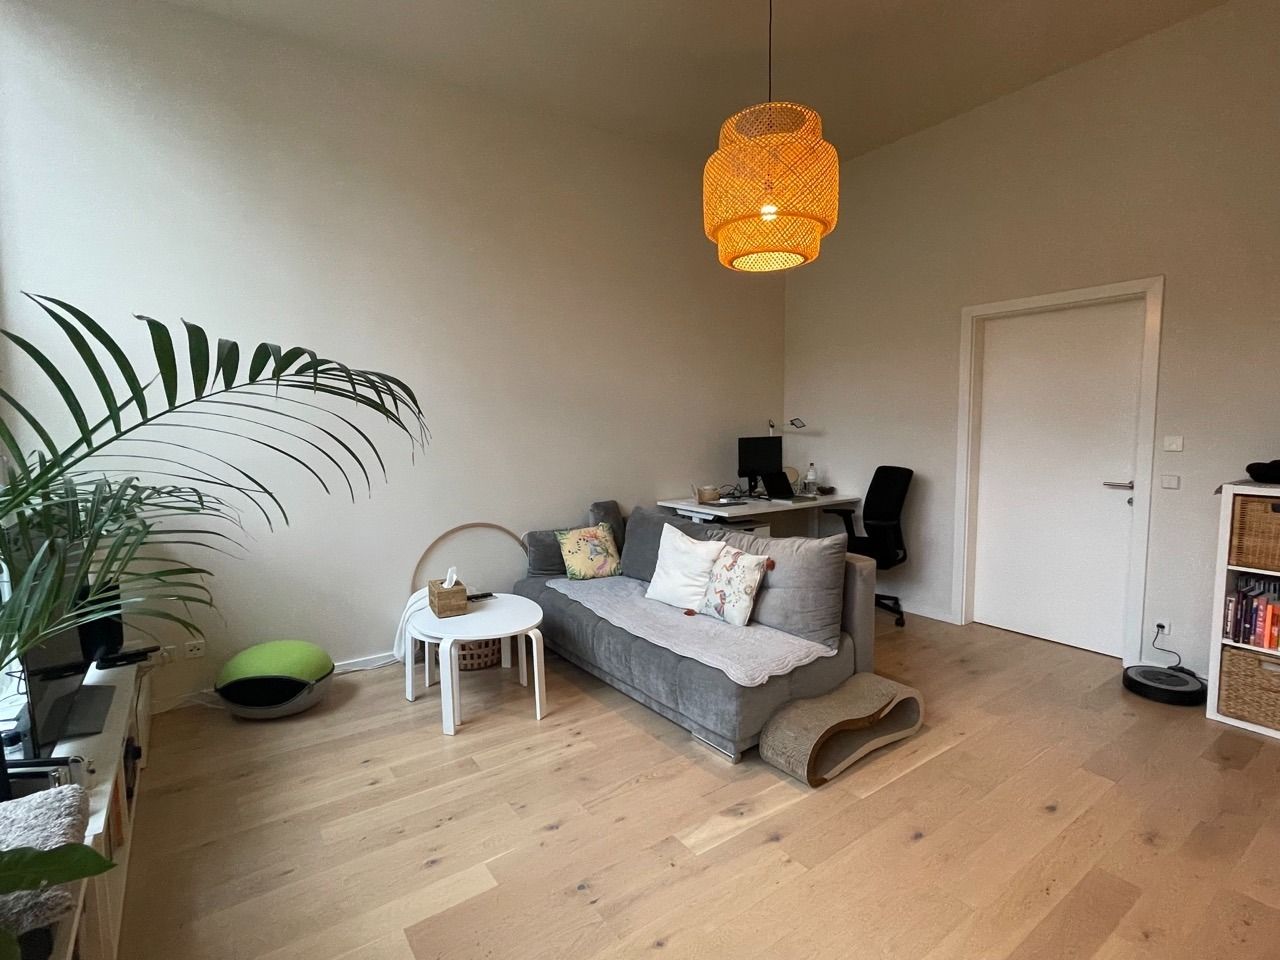 Neubau flat in Prenzlauer Berg for rent between March and July 2024